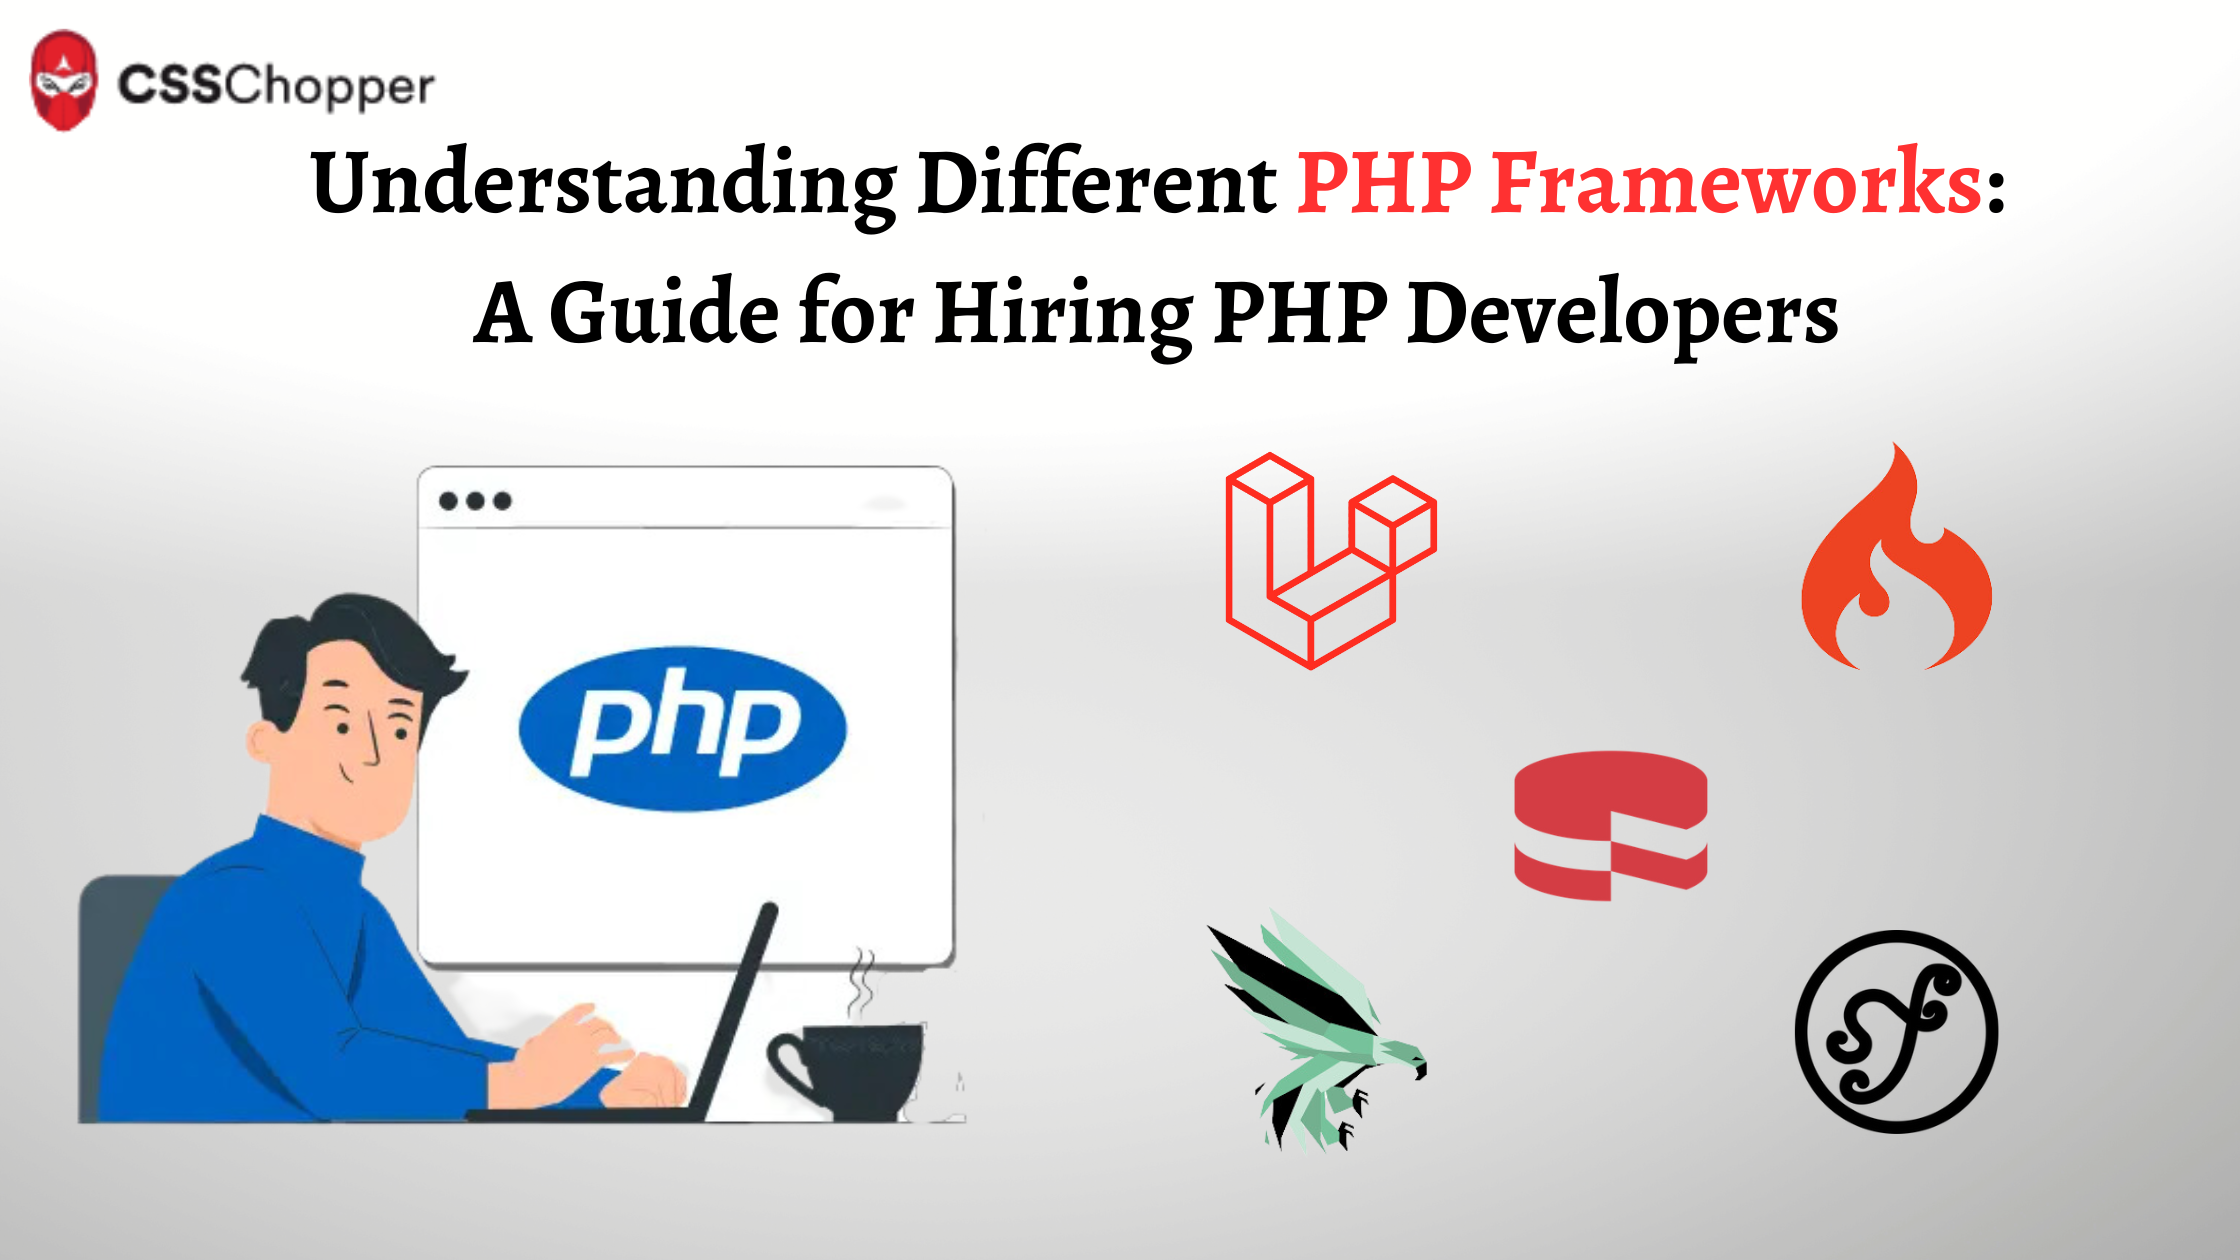 Understanding Different PHP Frameworks: A Guide for Hiring PHP Developers